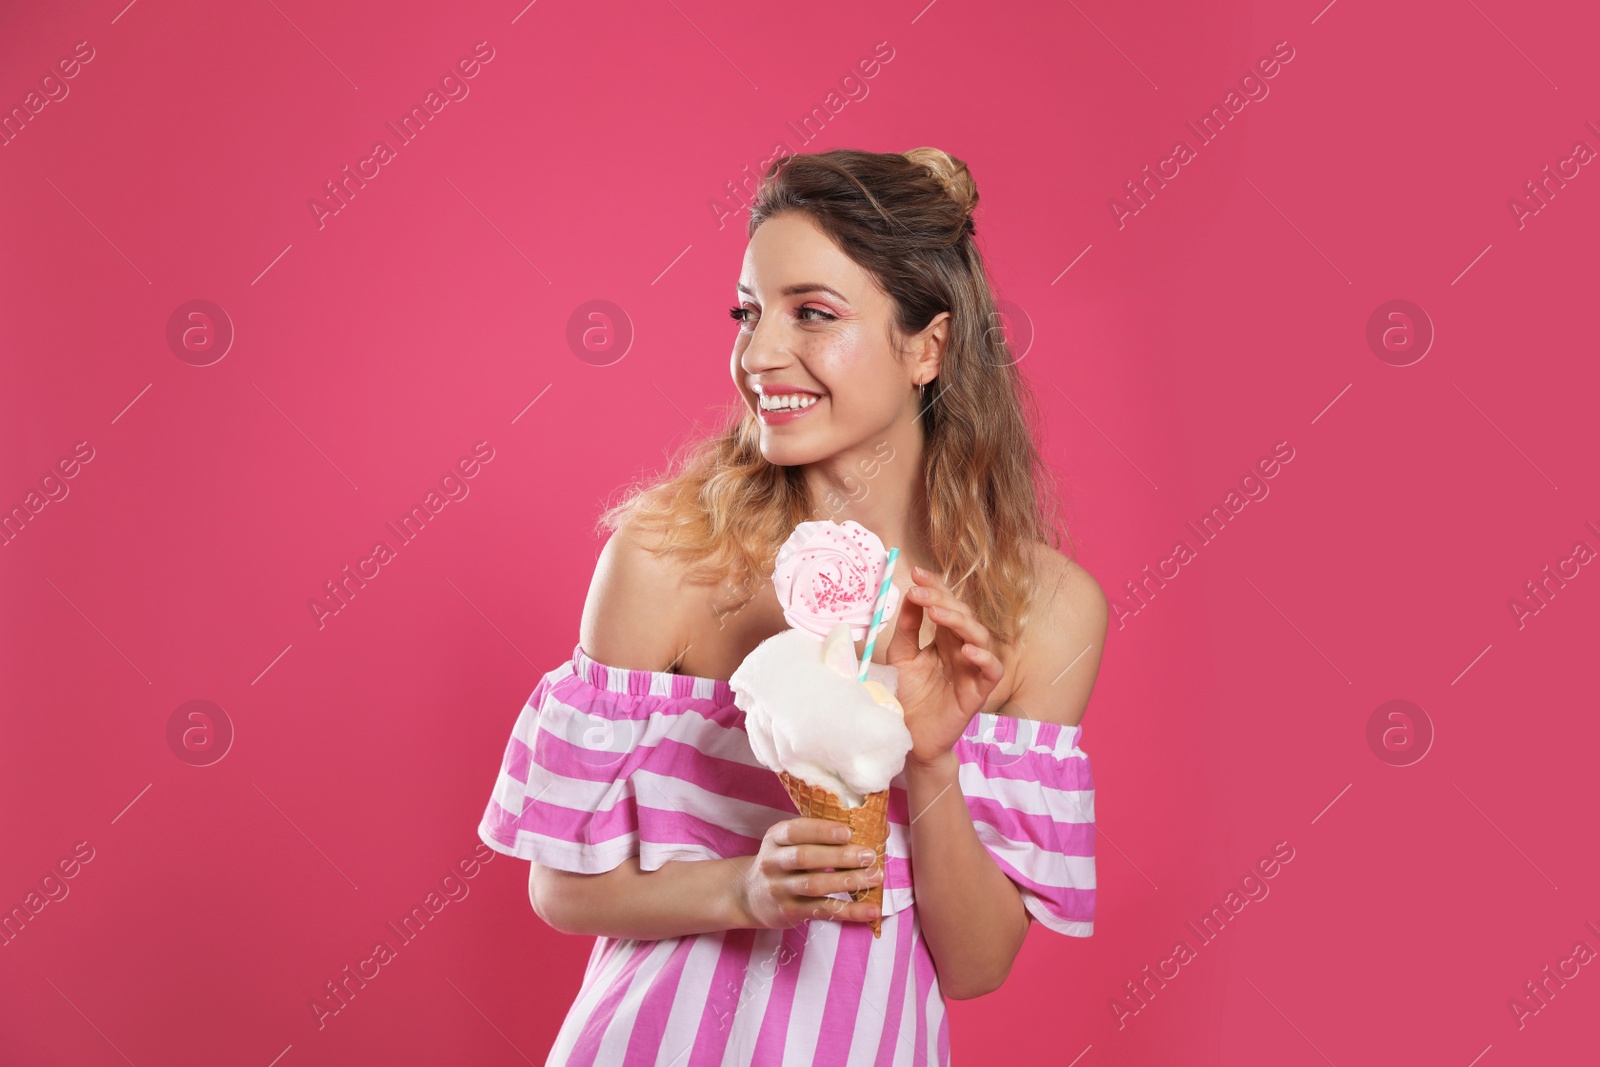 Photo of Portrait of young woman holding cotton candy dessert on pink background